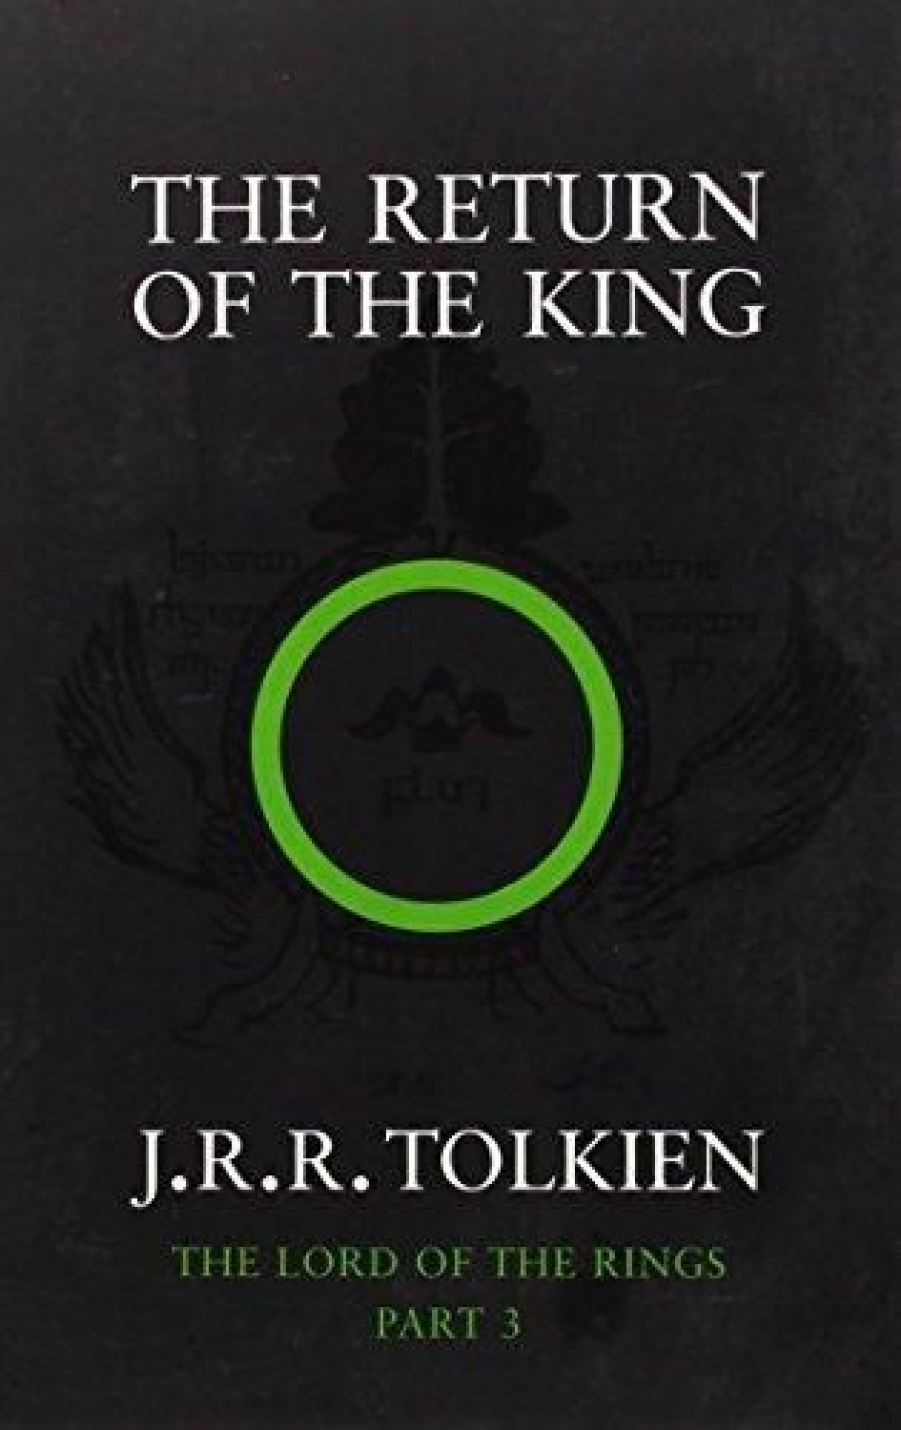 Tolkien J.R.R. Return of the King, The 